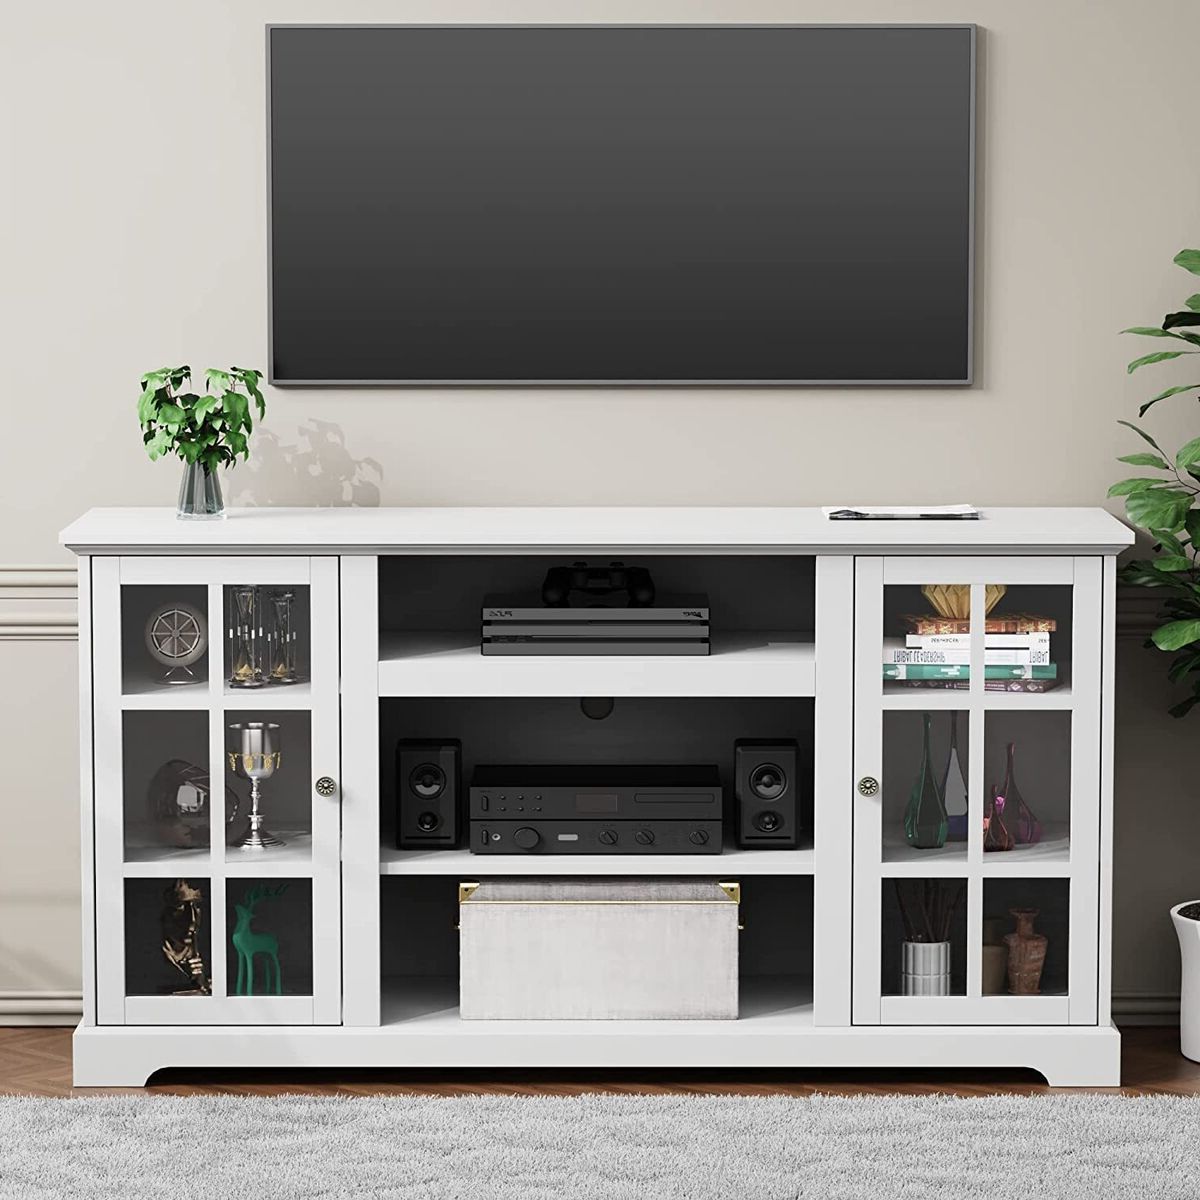 Farmhouse Tv Stand For Tv's Up To 65" Entertainment Center W/ Storage  Shelves | Ebay Intended For Farmhouse Stands For Tvs (View 9 of 20)